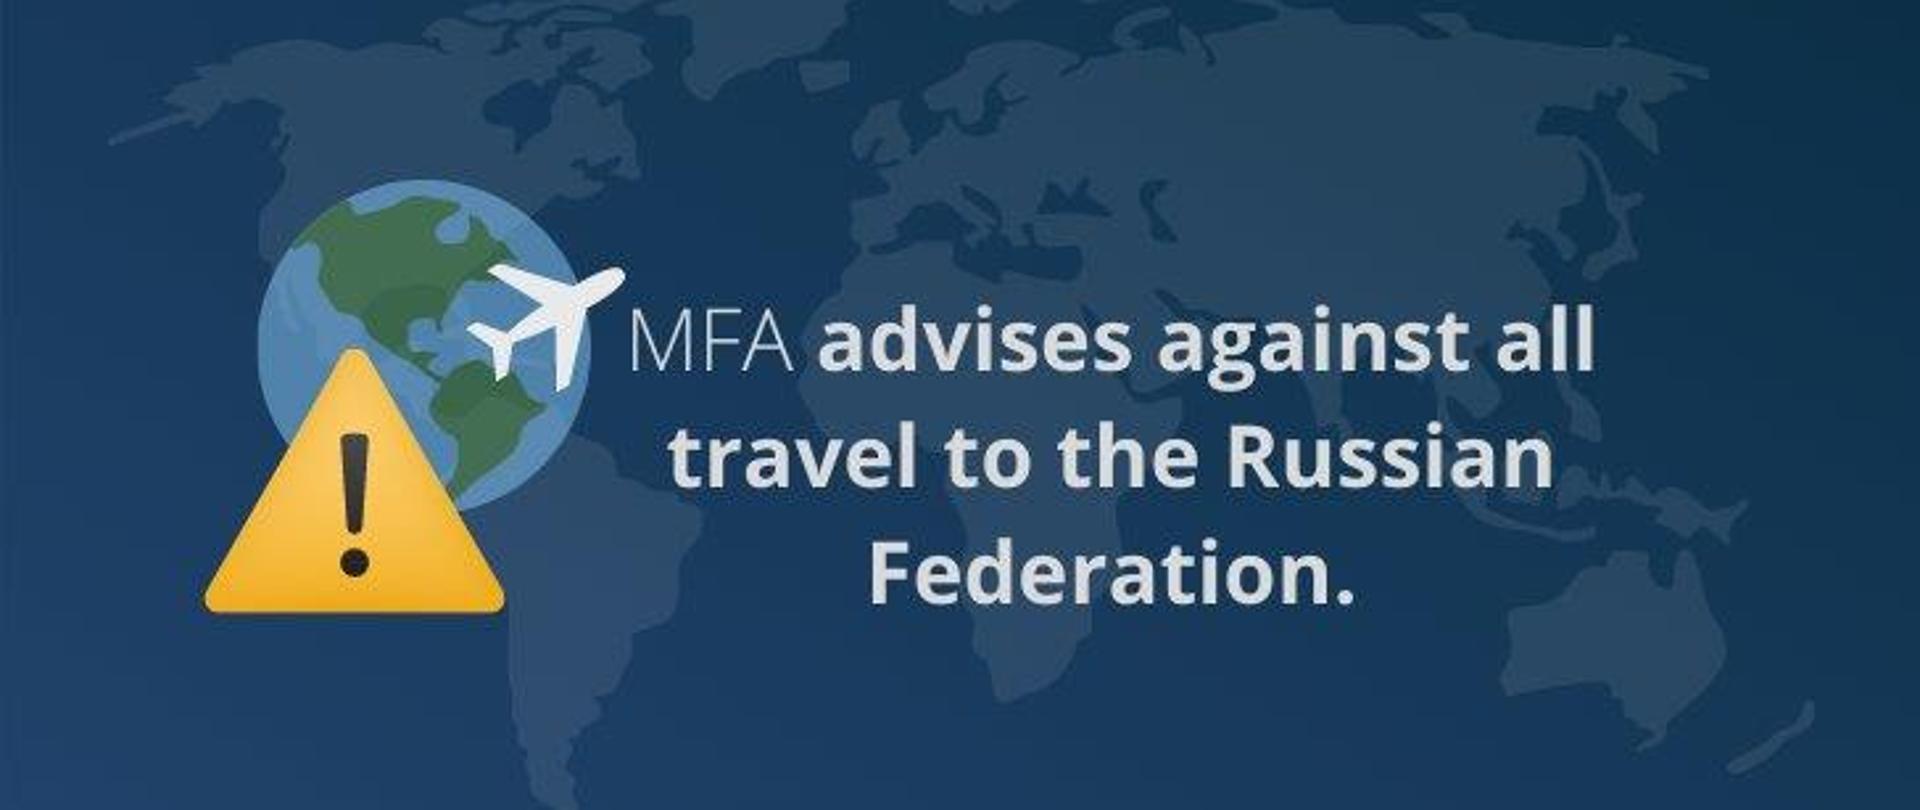 MFA advises against all travel to the Russian Federation